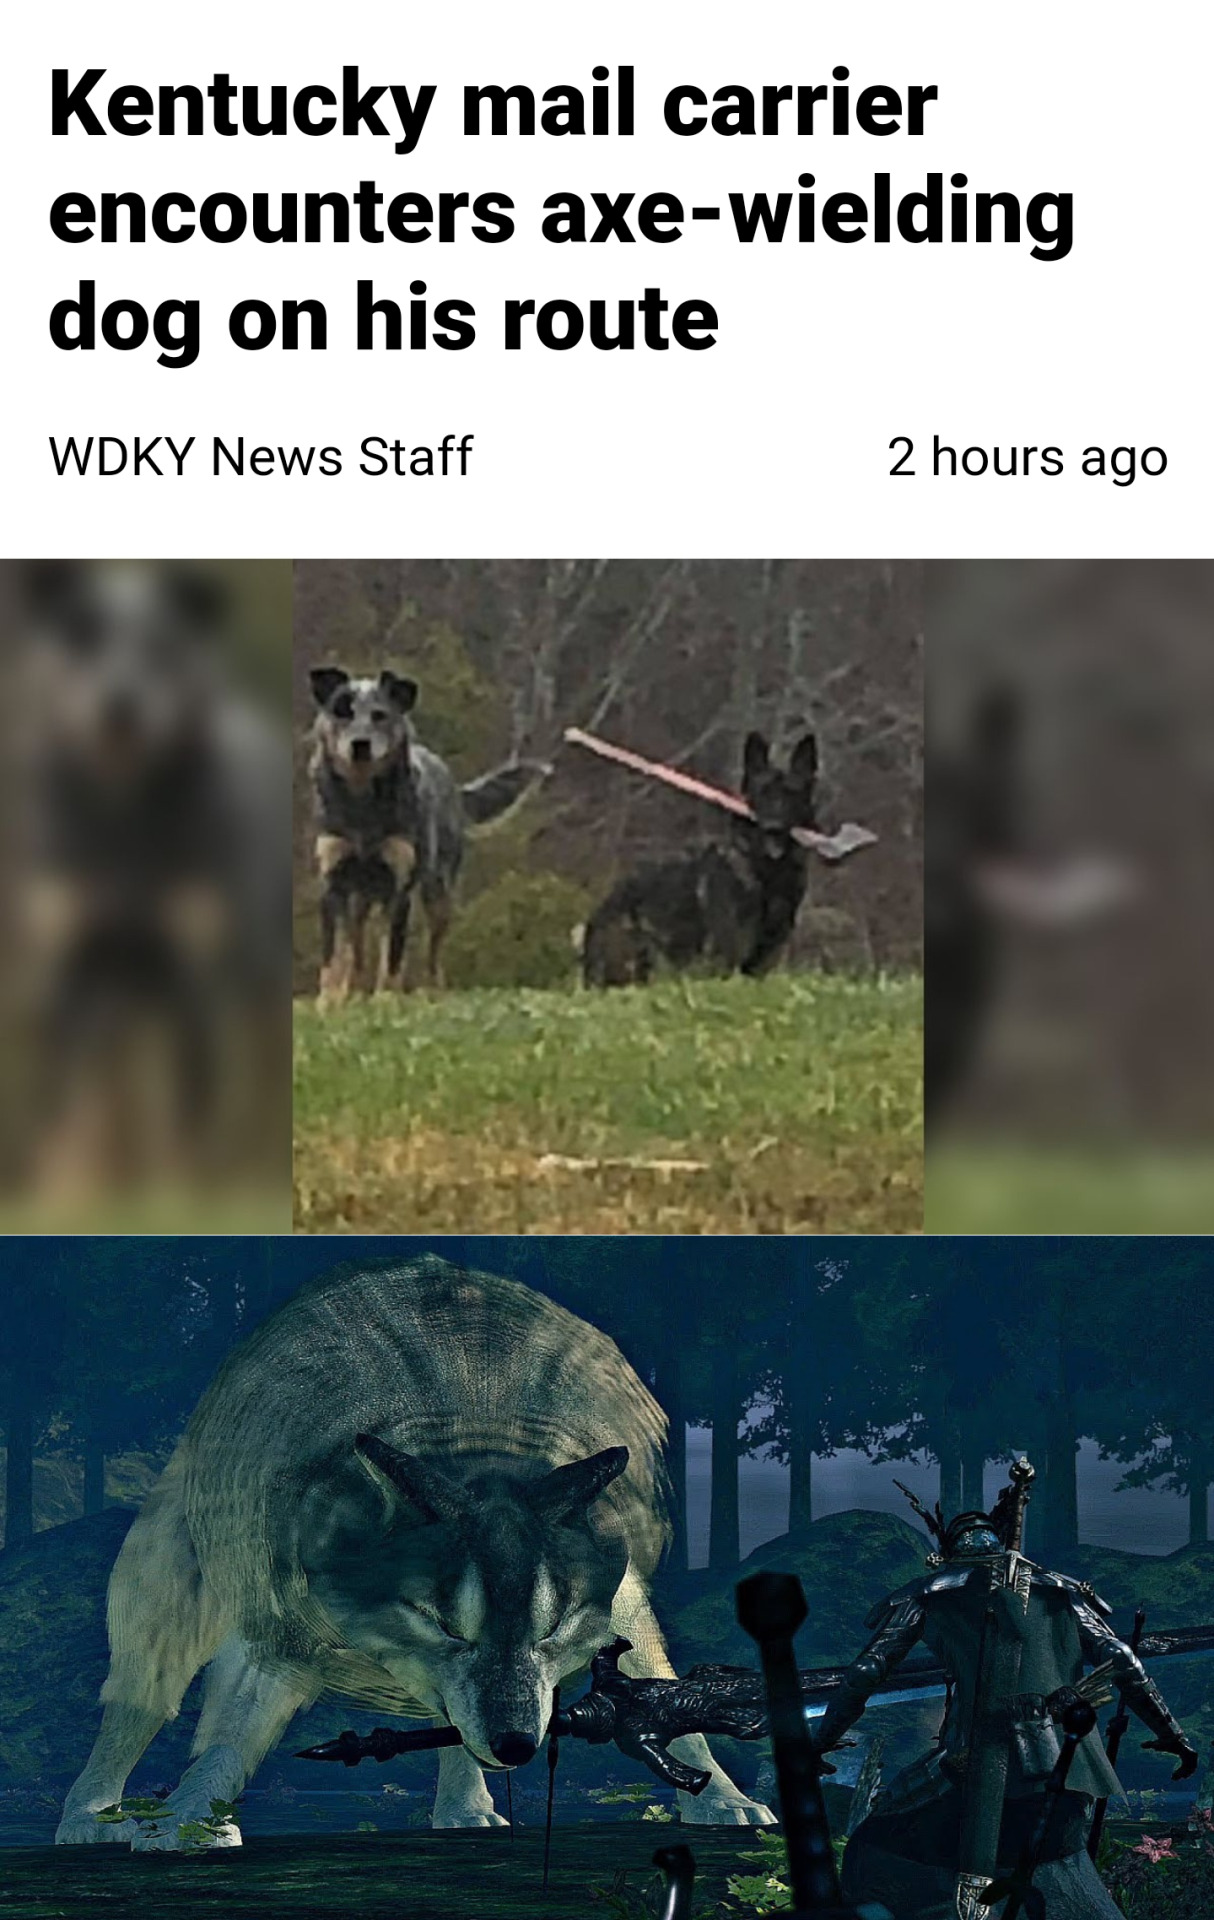 funny gaming memes - kentucky mail carrier axe dog - Kentucky mail carrier encounters axewielding dog on his route Wdky News Staff 2 hours ago